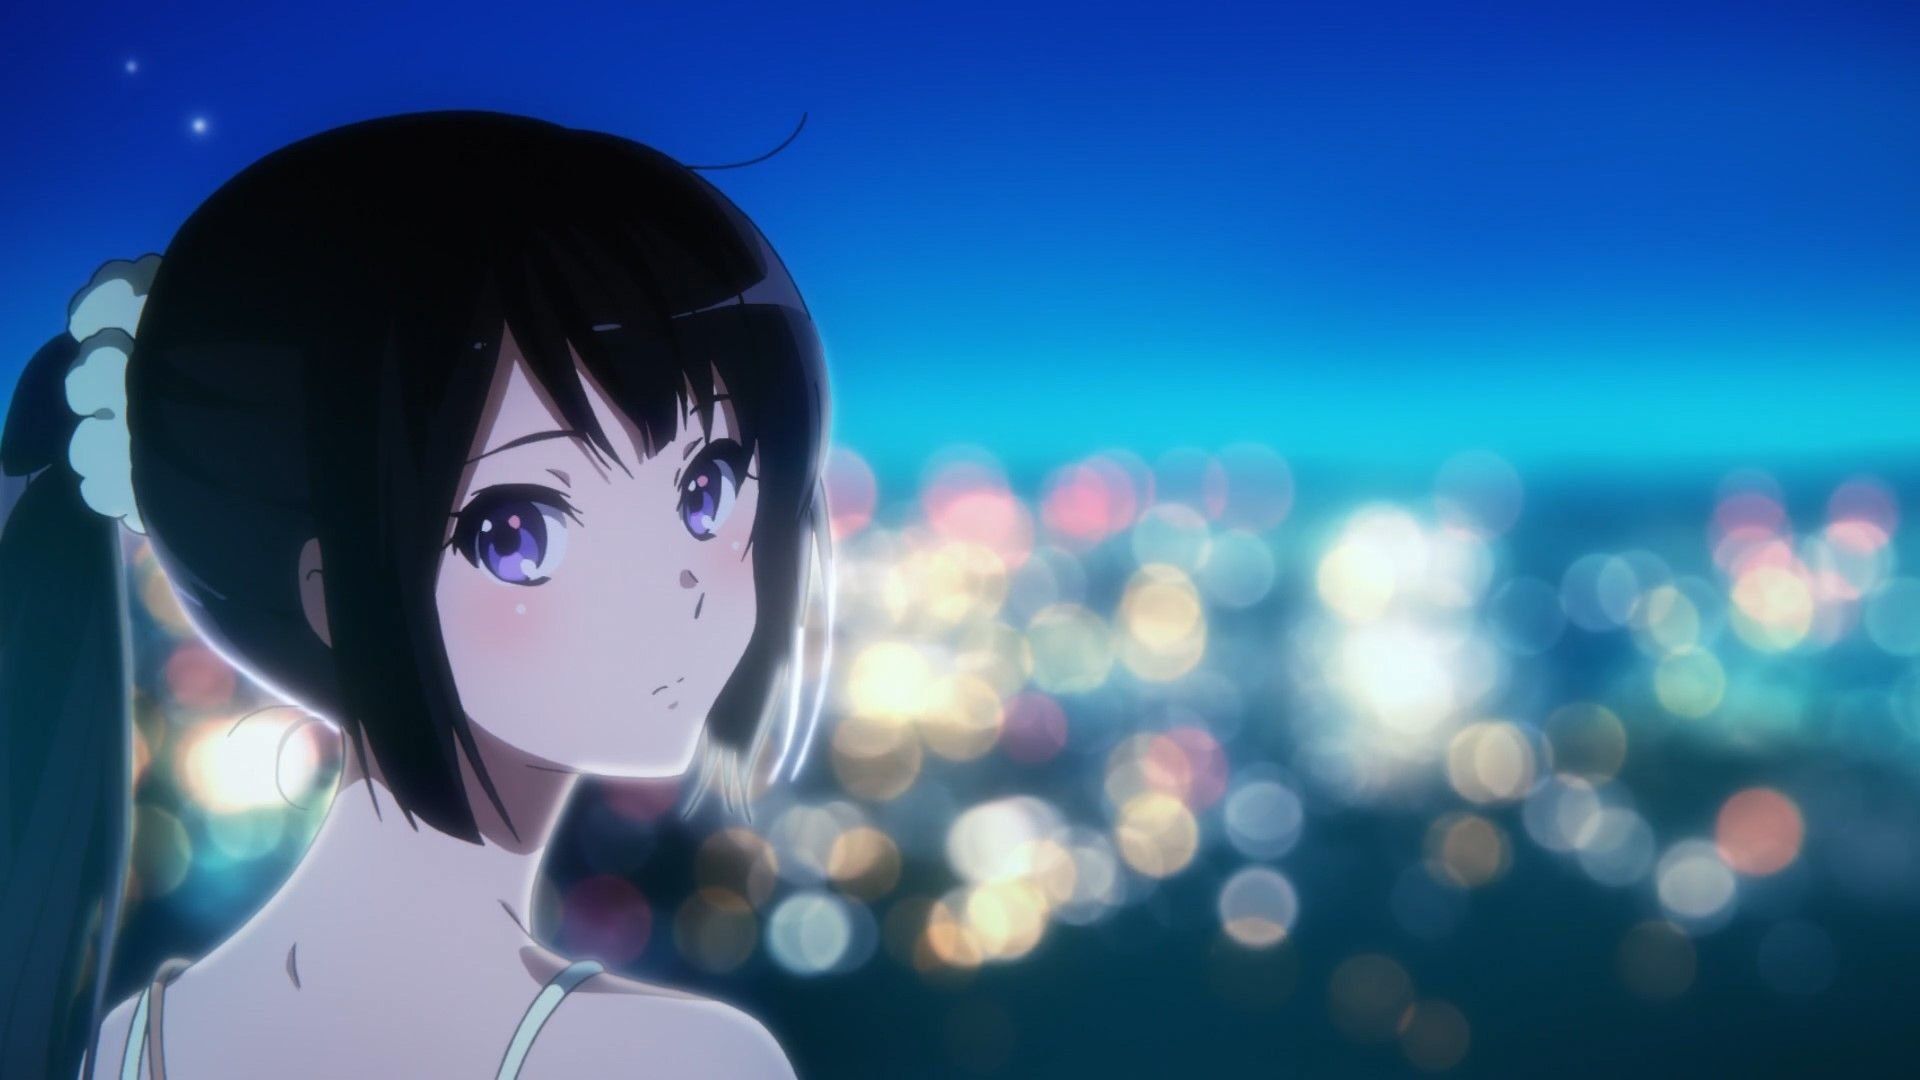 Anime girl with long hair looking at the city - Anime girl